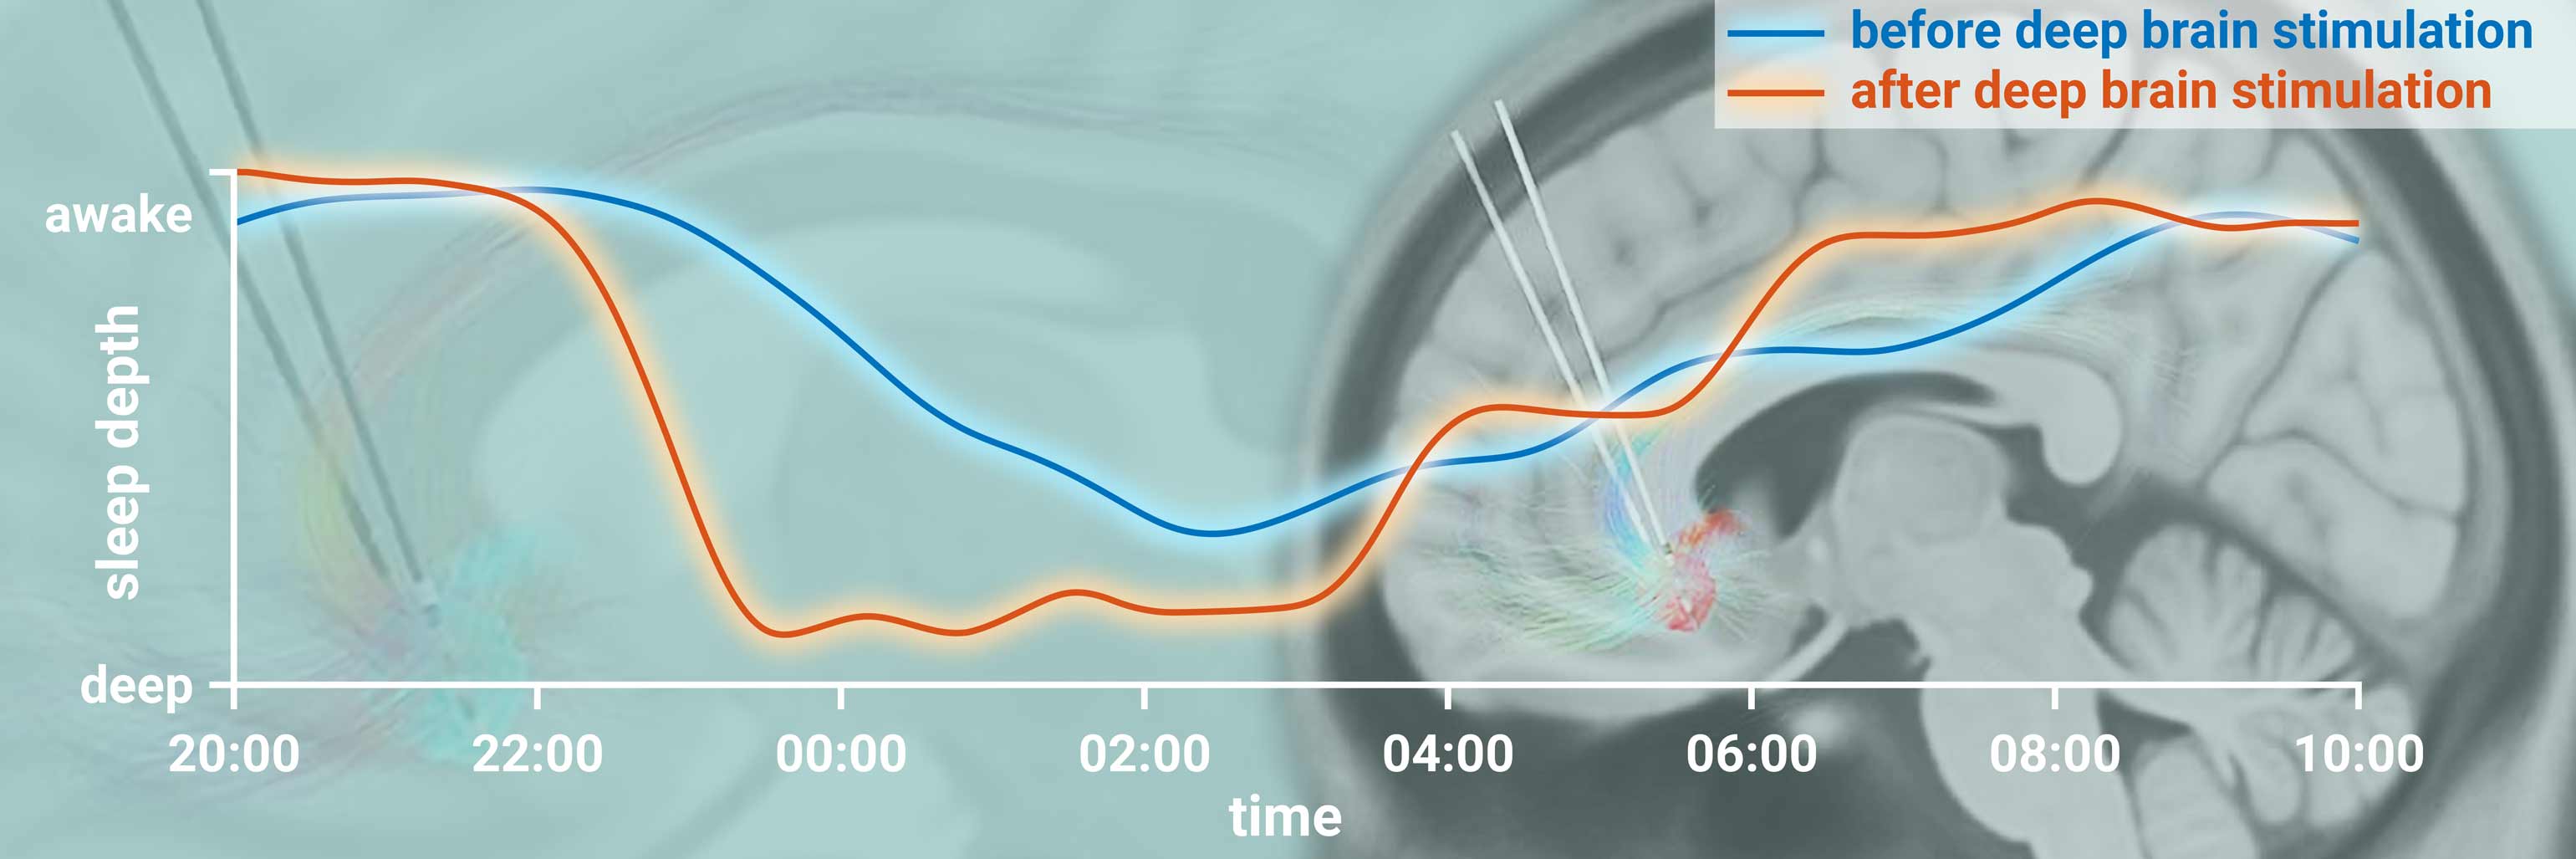 Graph of depth of sleep vs time in the night, showing post-DBS giving deeper sleep occurring earlier in the night than Pre-DBS; also a brain image from MRI showing the location of the DBS electrodes.